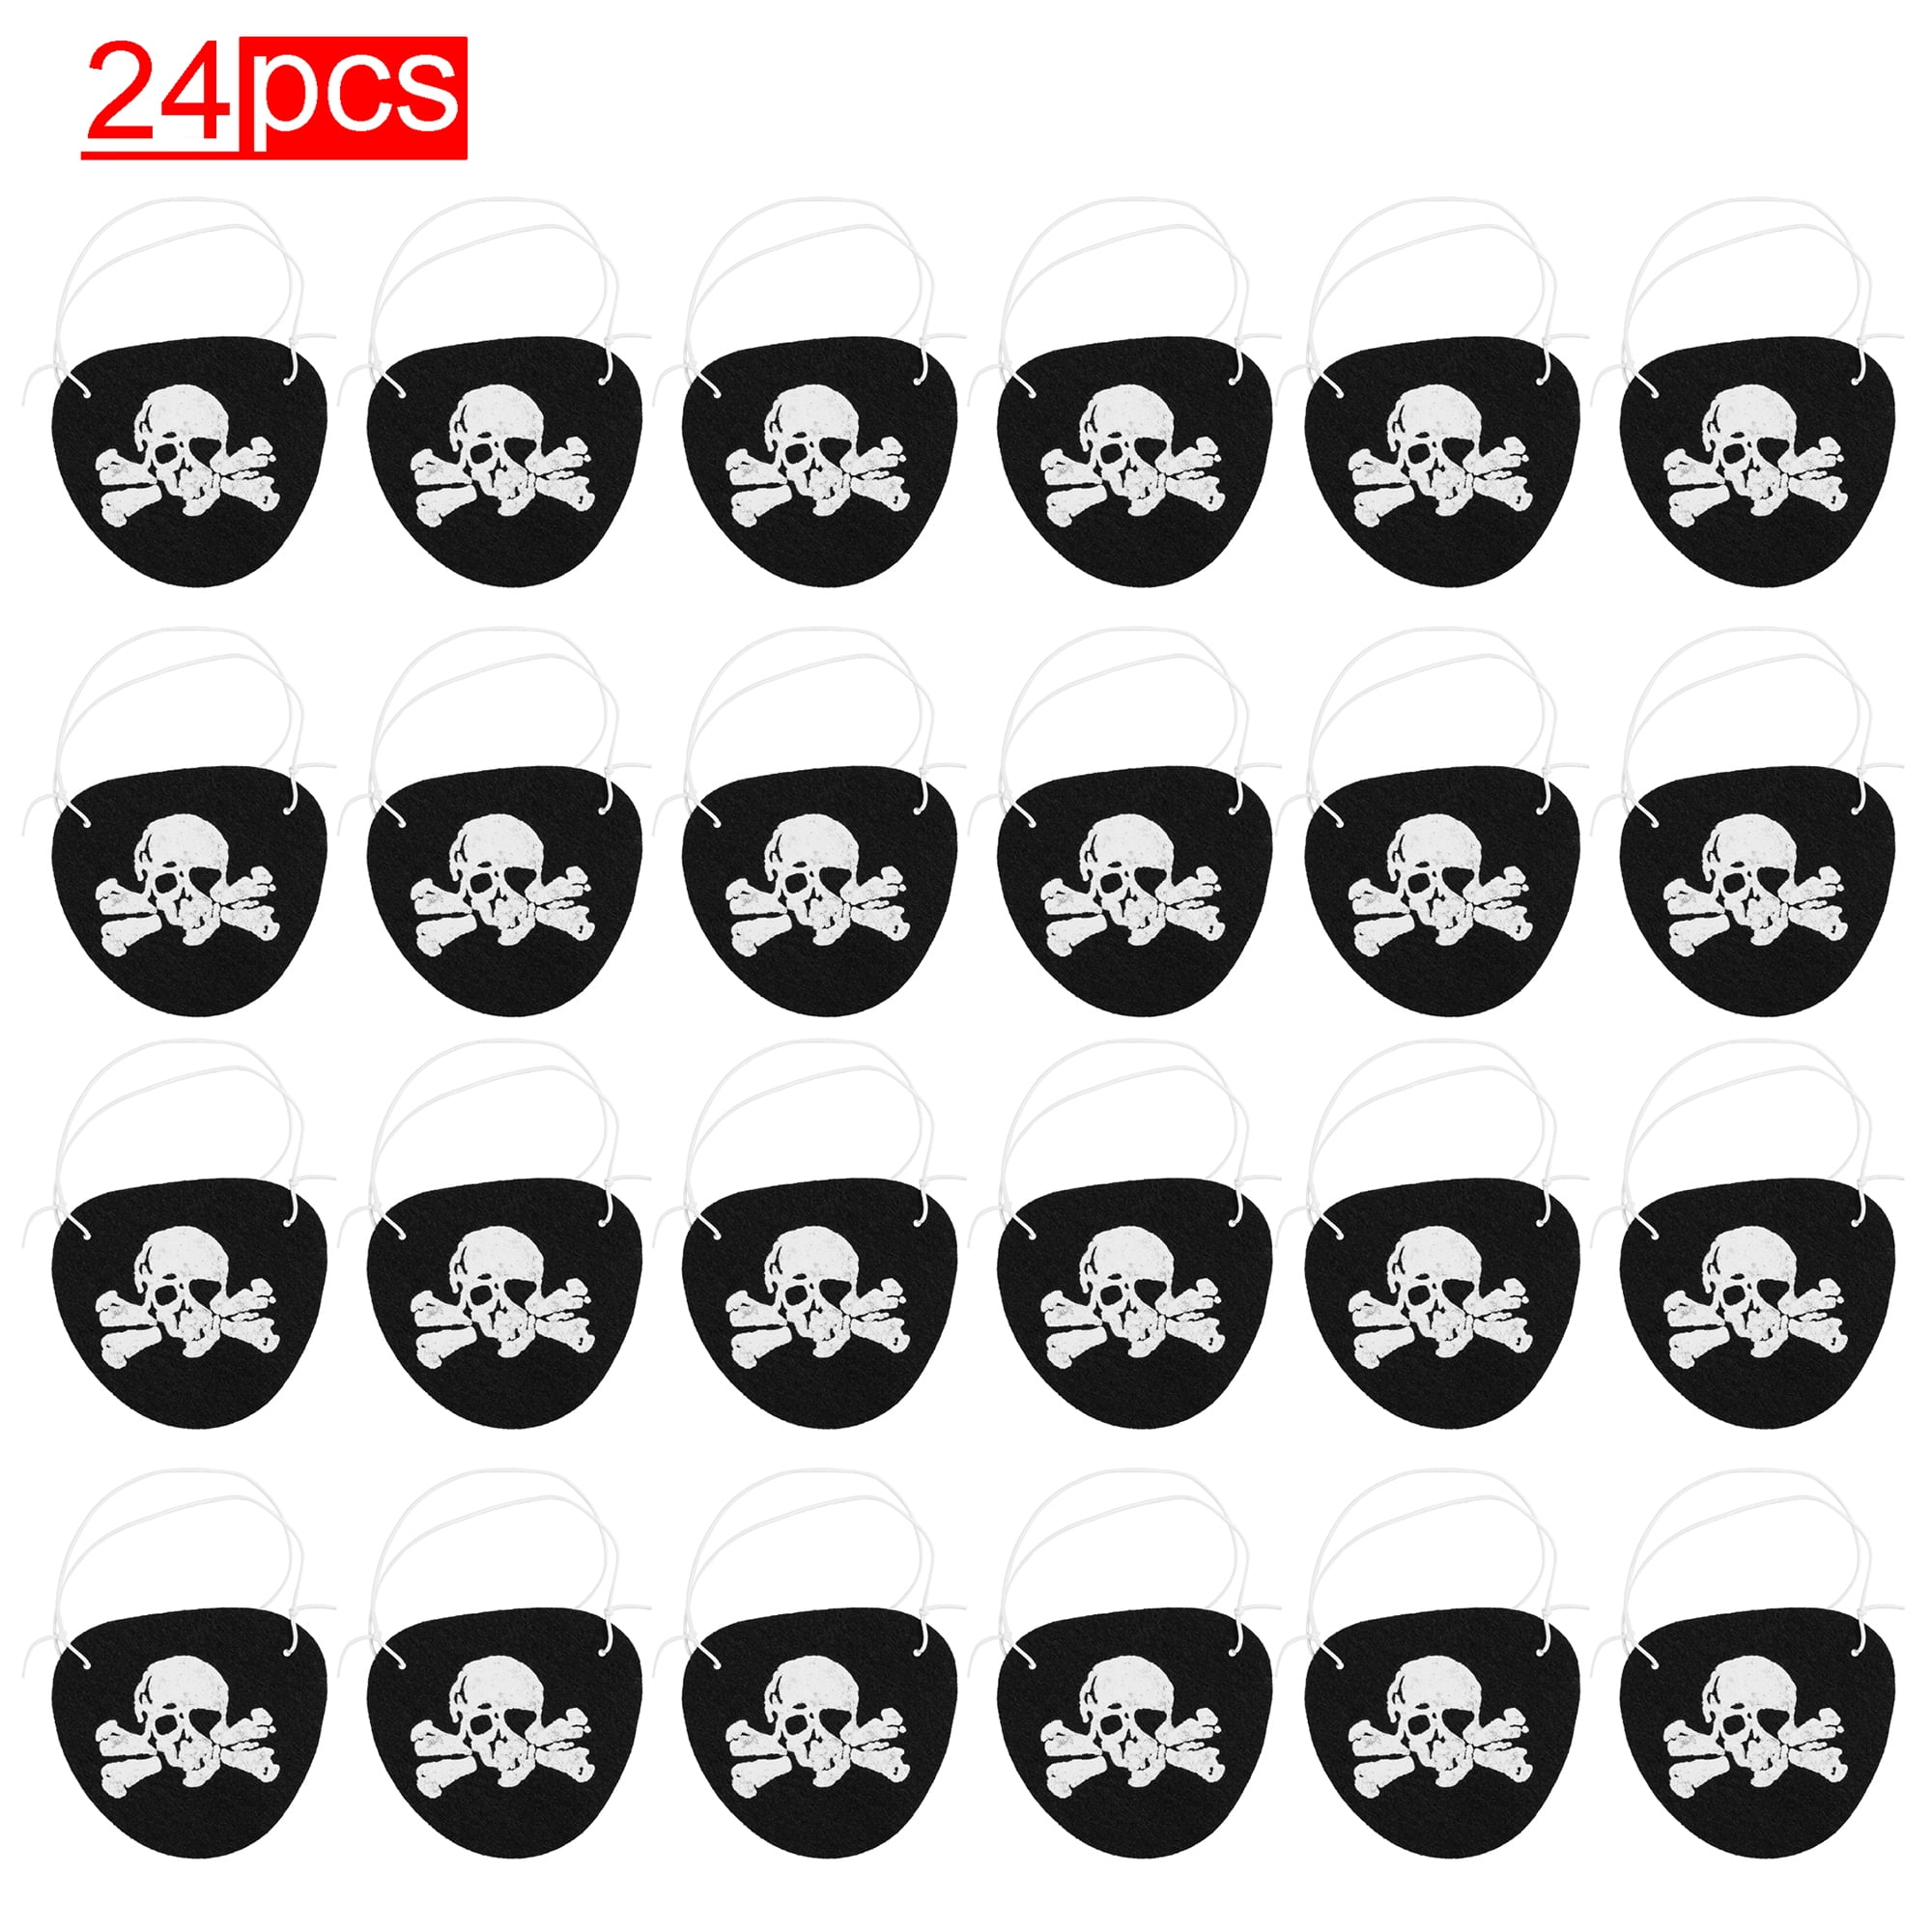 4 Pirate Treasure Children's Party Favours Loot Gifts Black Eye Patches Earrings 